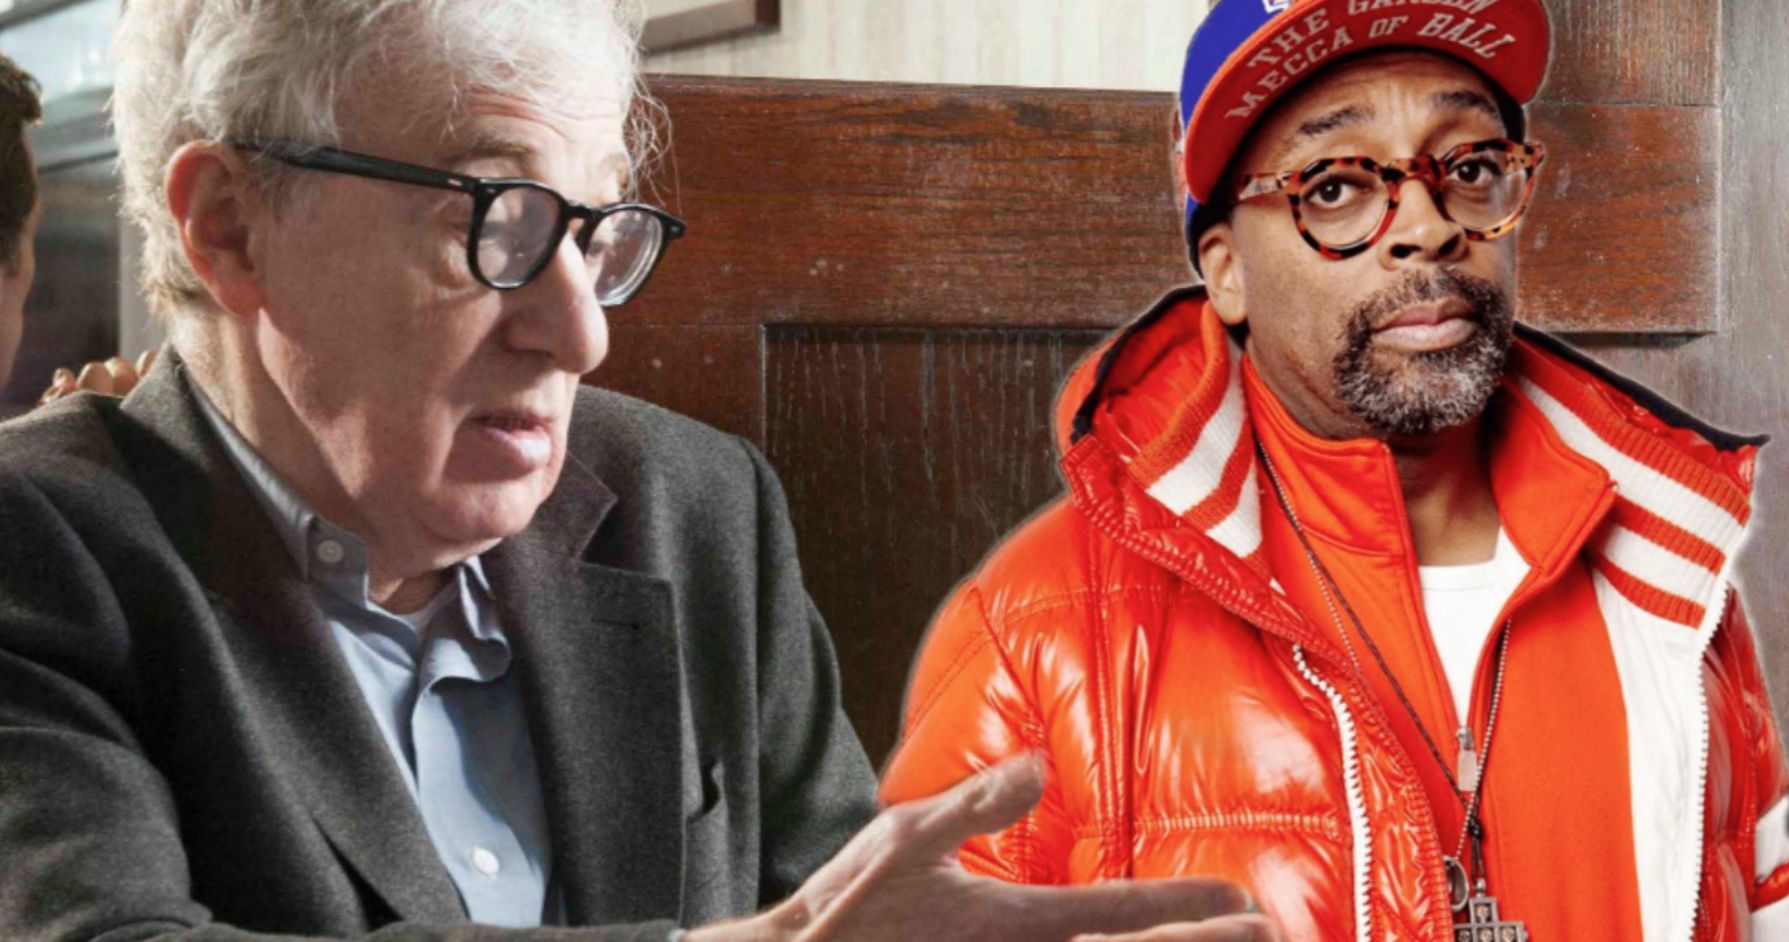 Spike Lee Stands Up for Woody Allen While Criticizing Cancel Culture